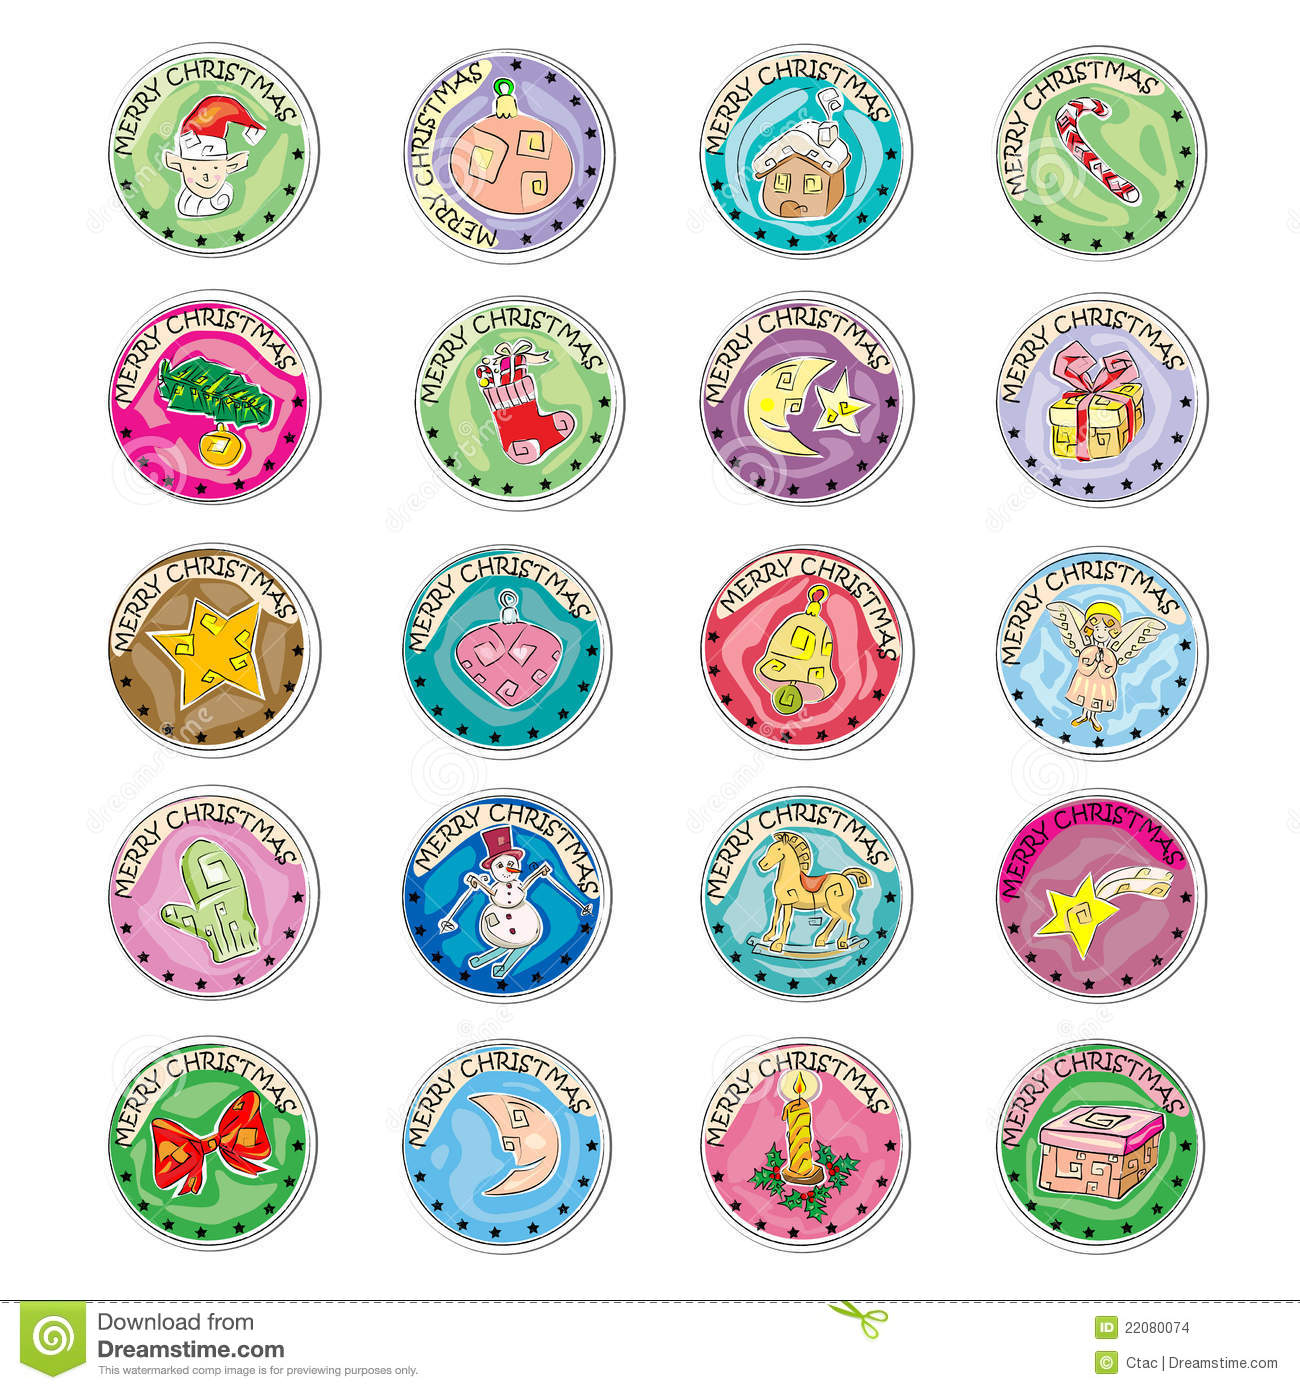 Nickel Clip Art Http   Www Dreamstime Com Stock Images Christmas Coins